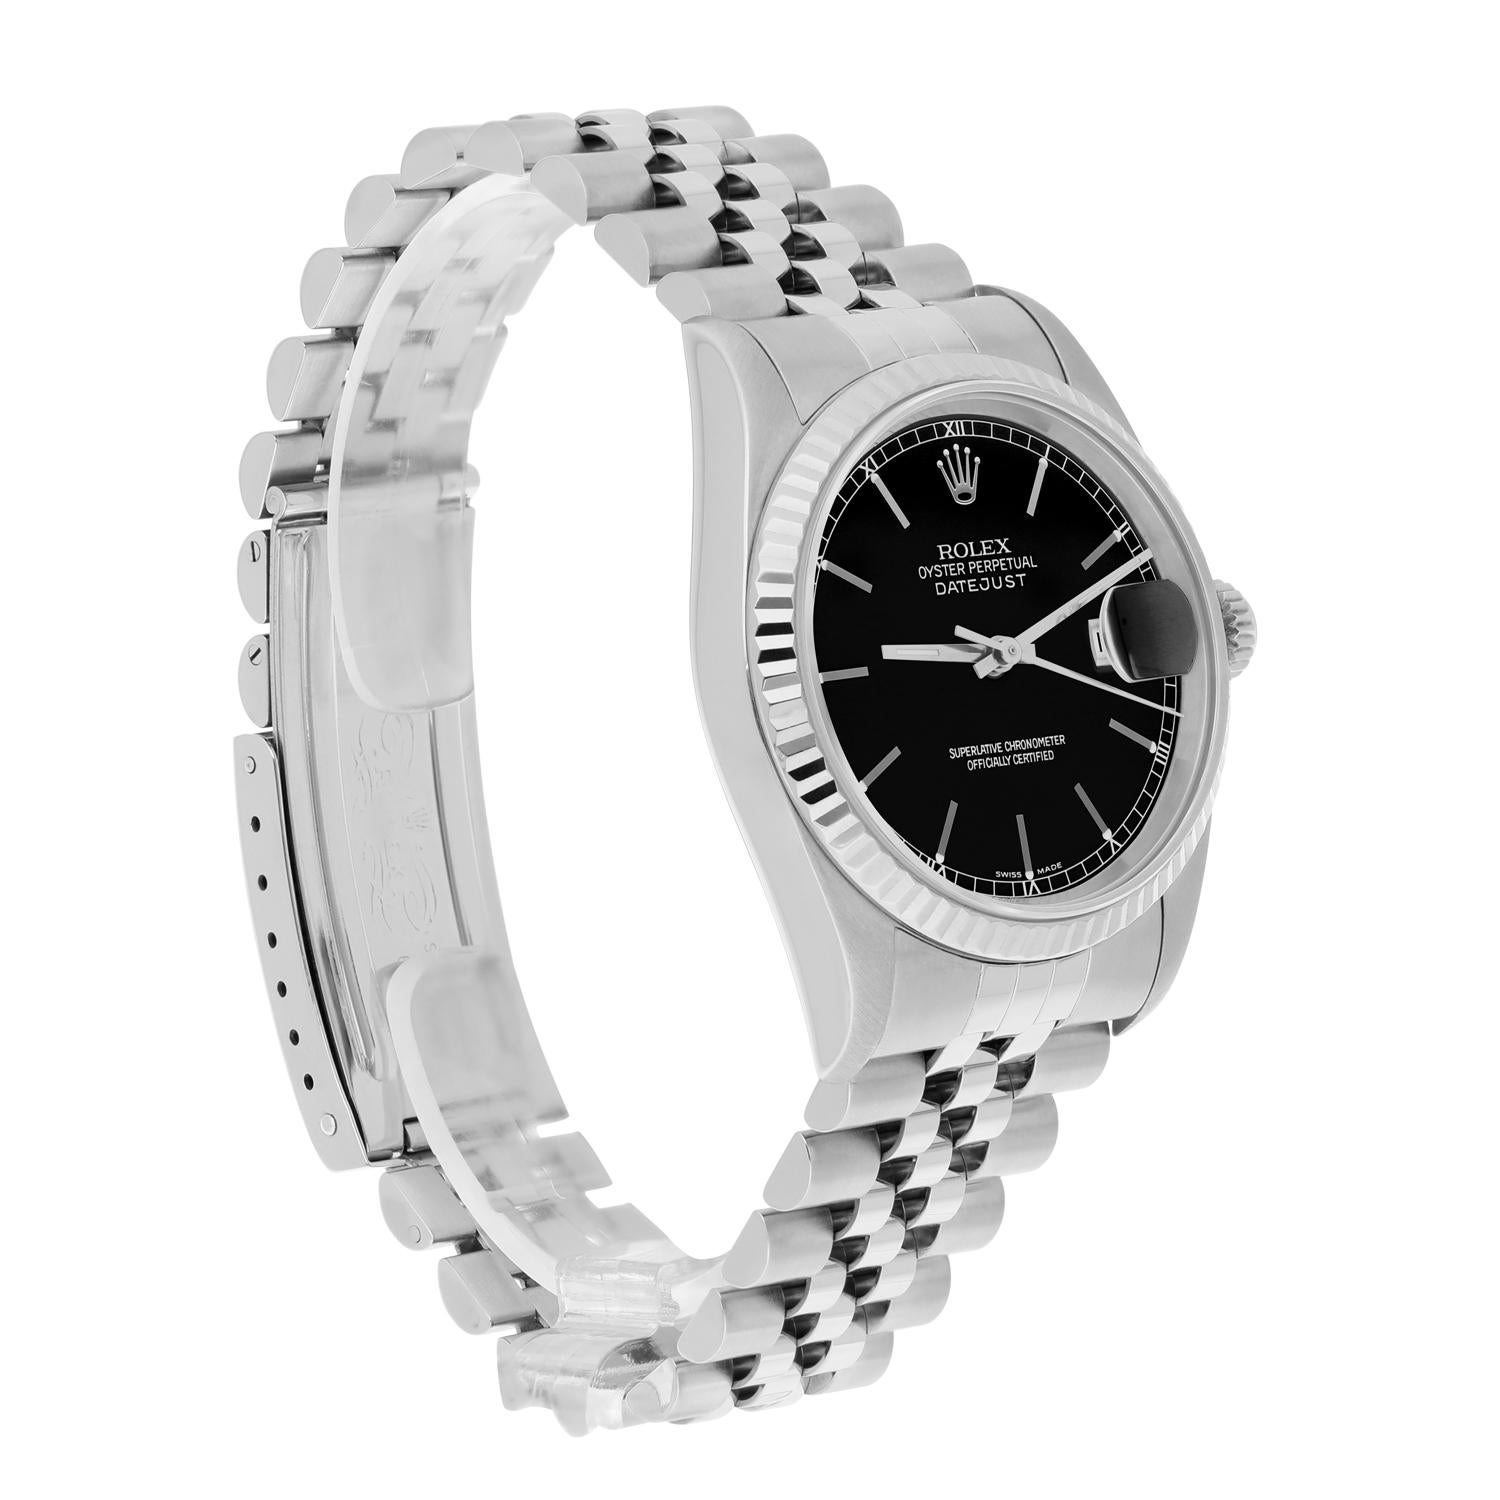 Rolex Datejust 36mm Stainless Steel 16234 Black Index Dial, Jubilee Circa 2000 For Sale 2